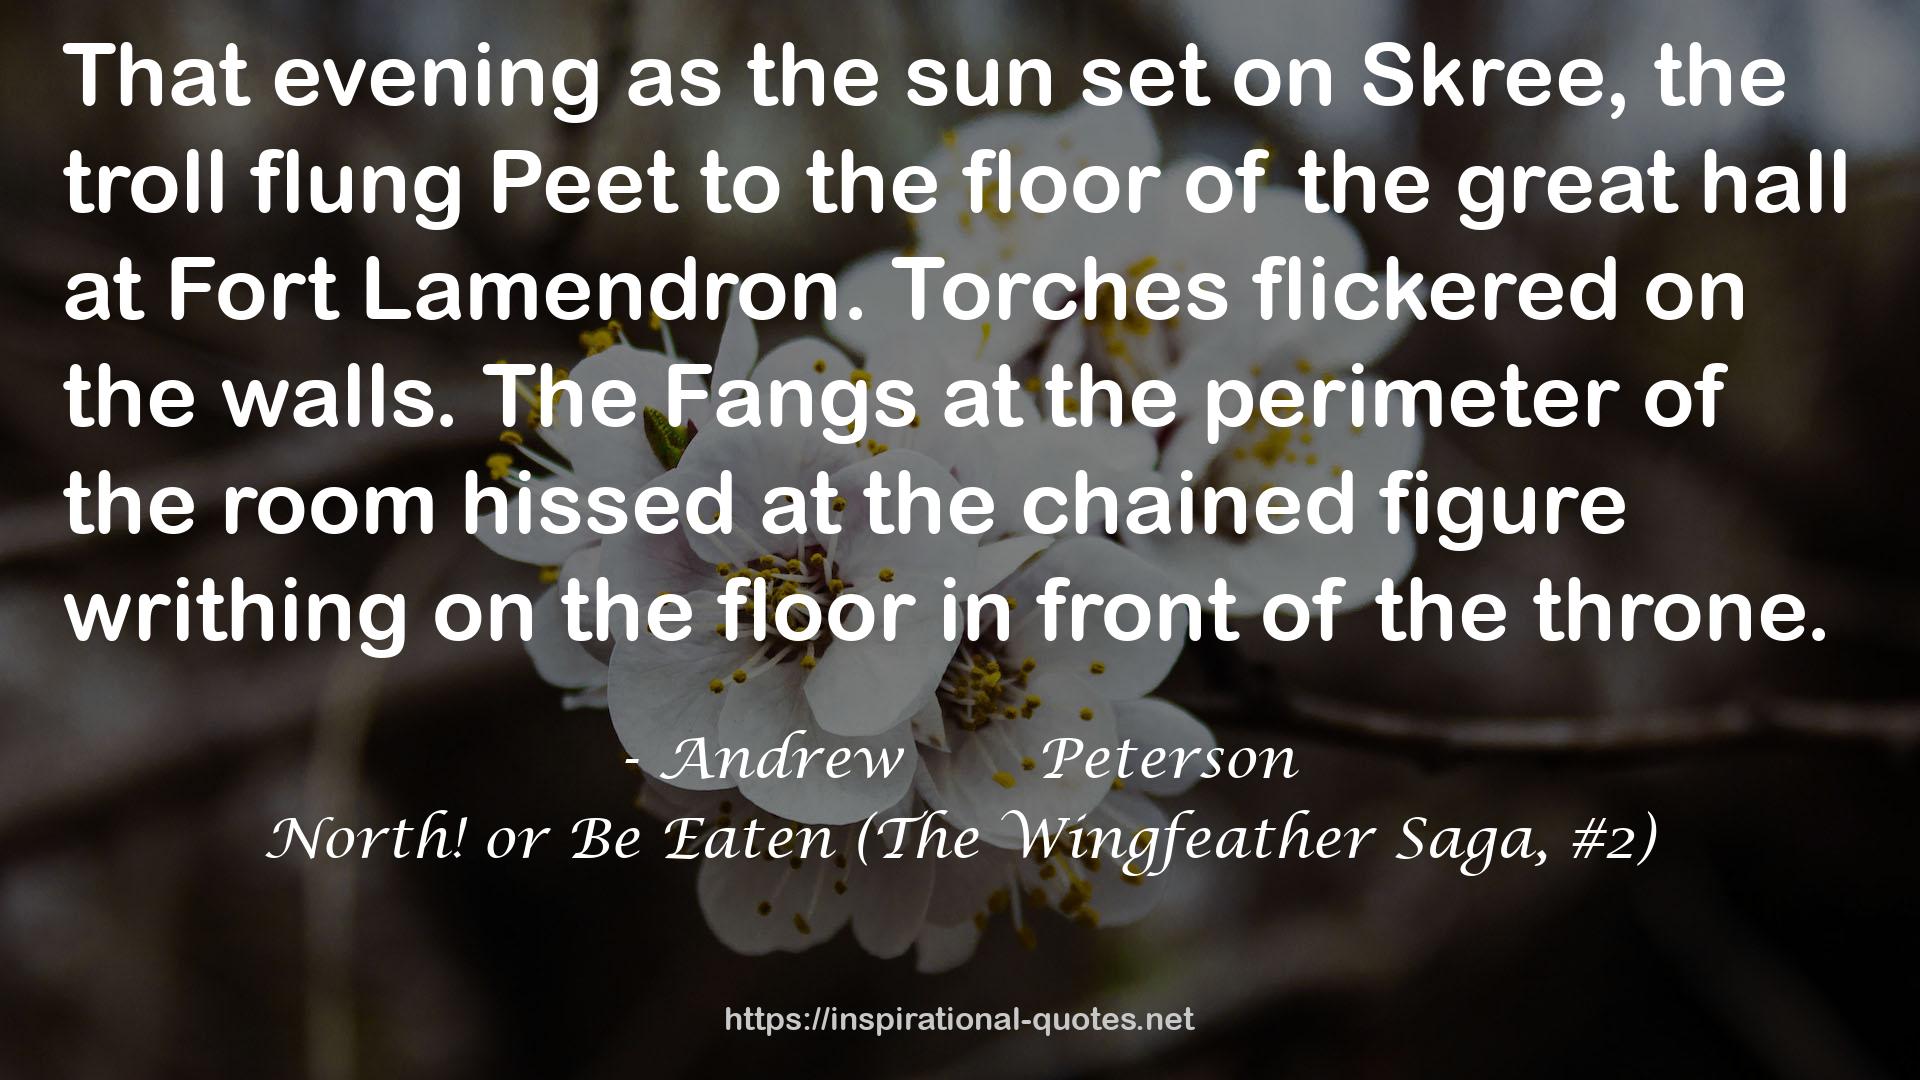 North! or Be Eaten (The Wingfeather Saga, #2) QUOTES